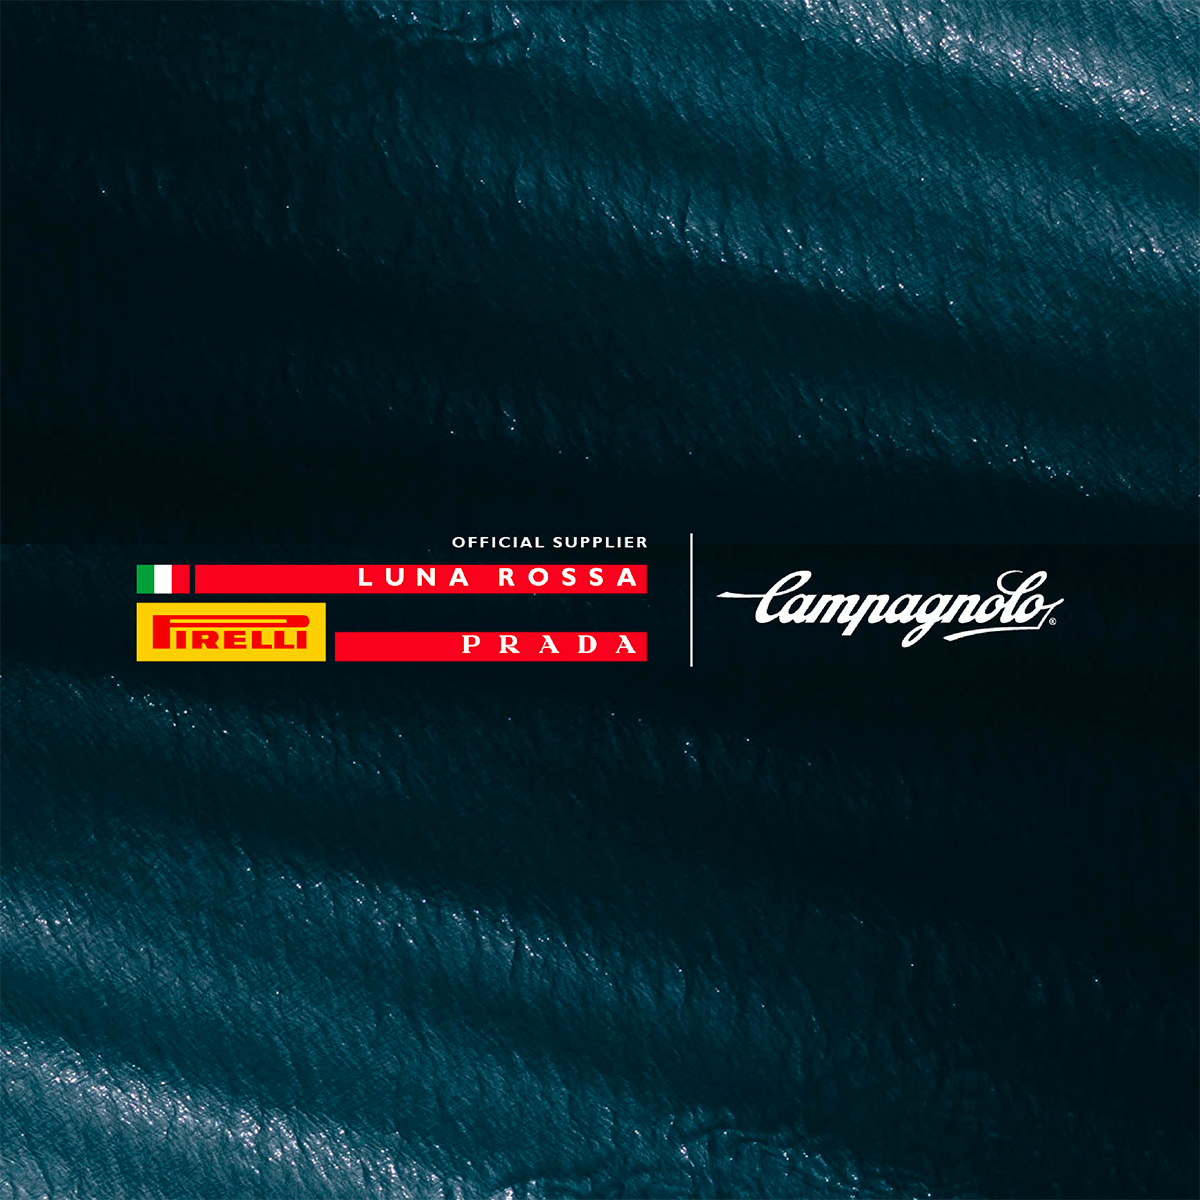 Campagnolo joins forces with Luna Rossa Prada Pirelli as Official Supplier for the 37th America’s Cup